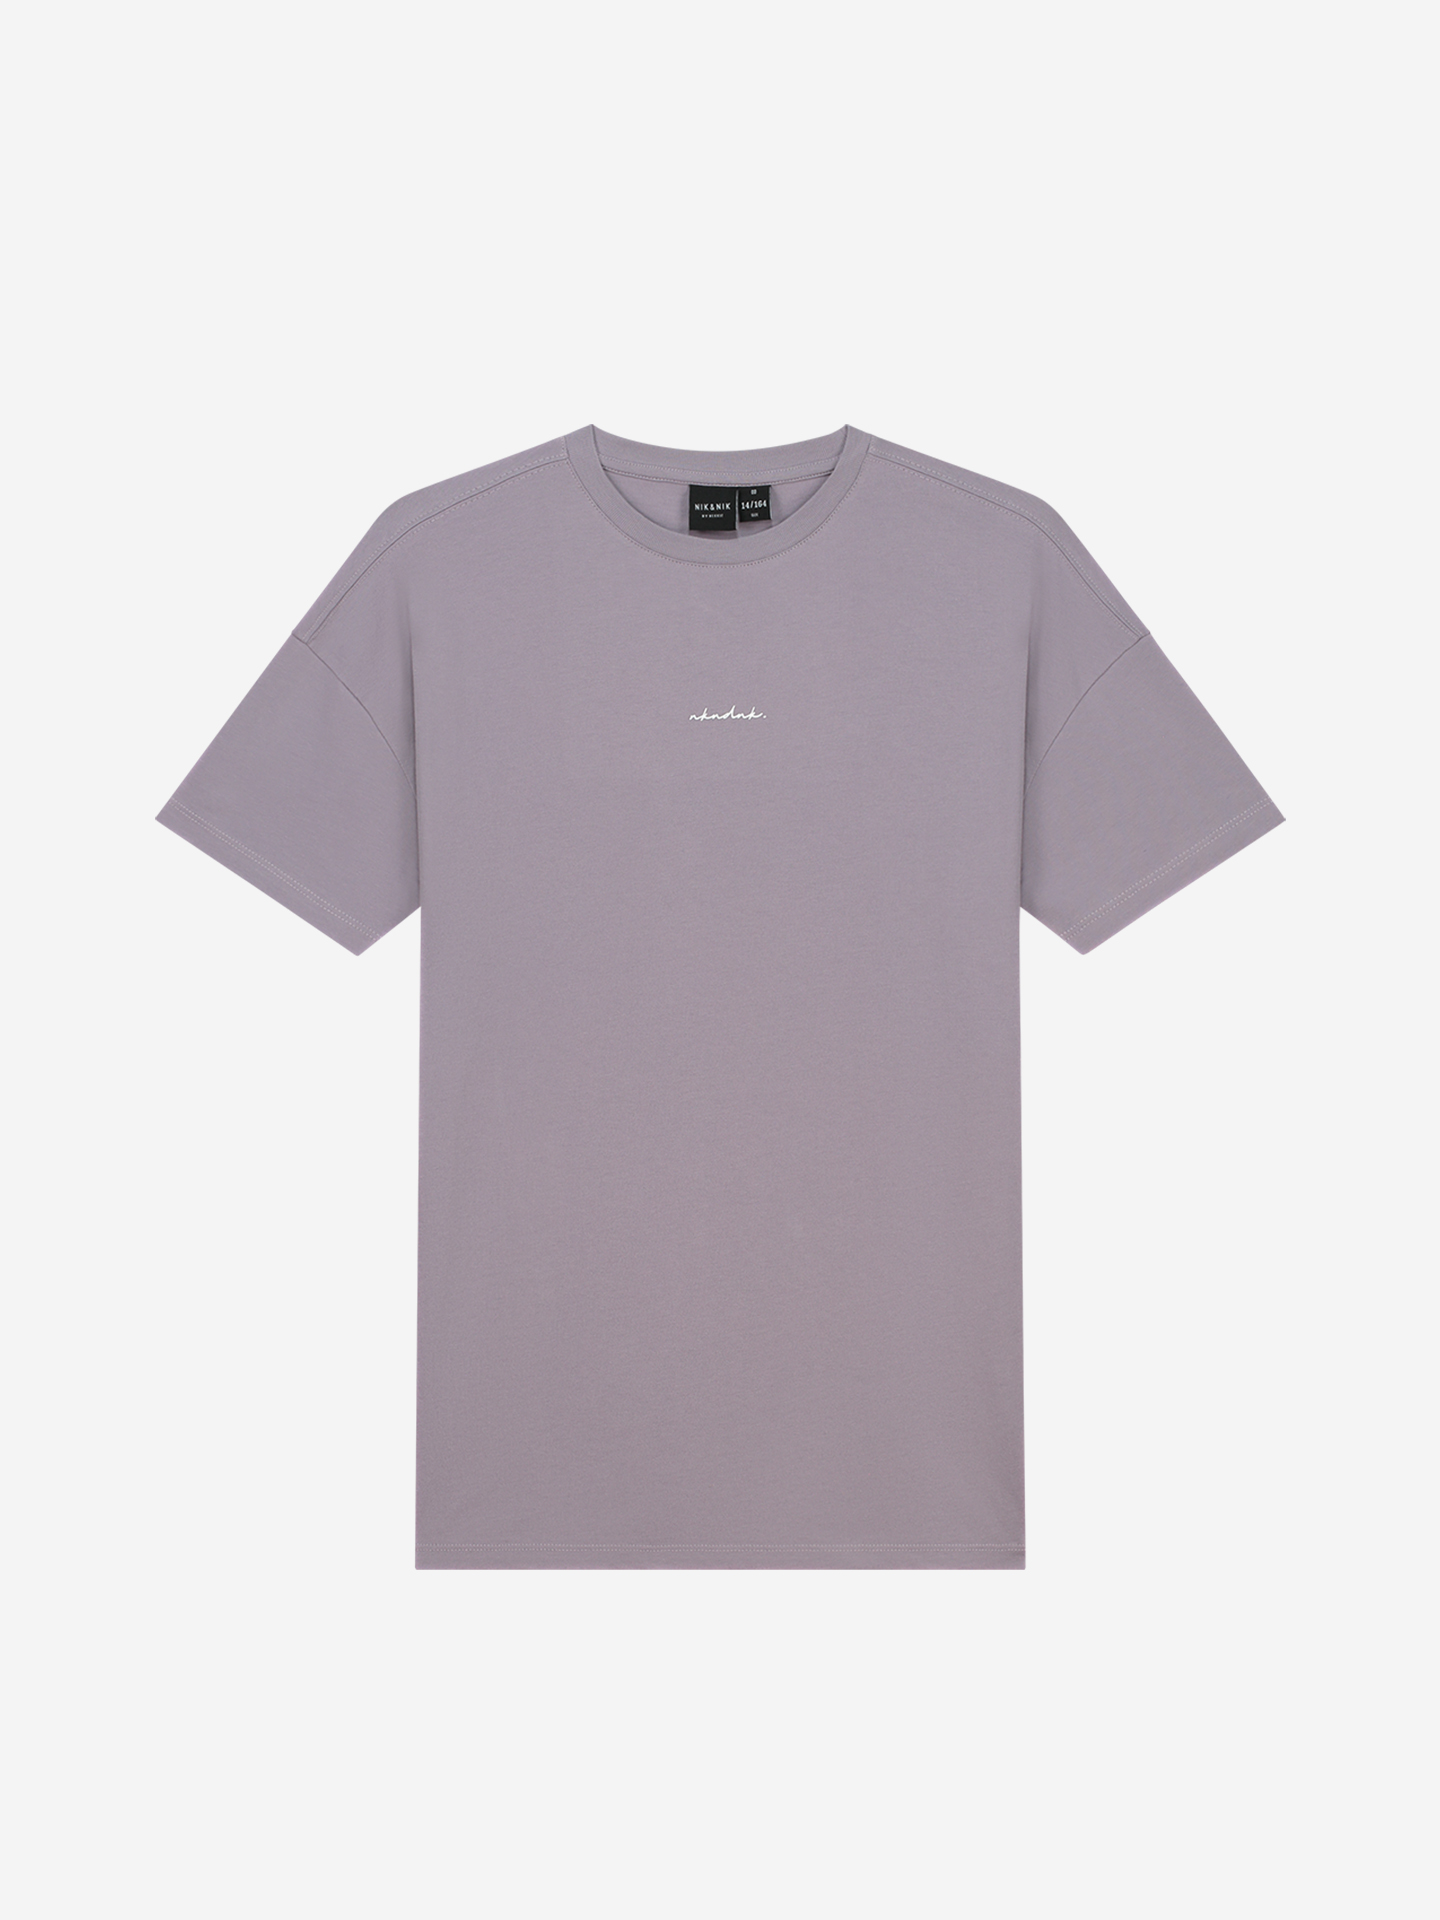 Loose fit t-shirt